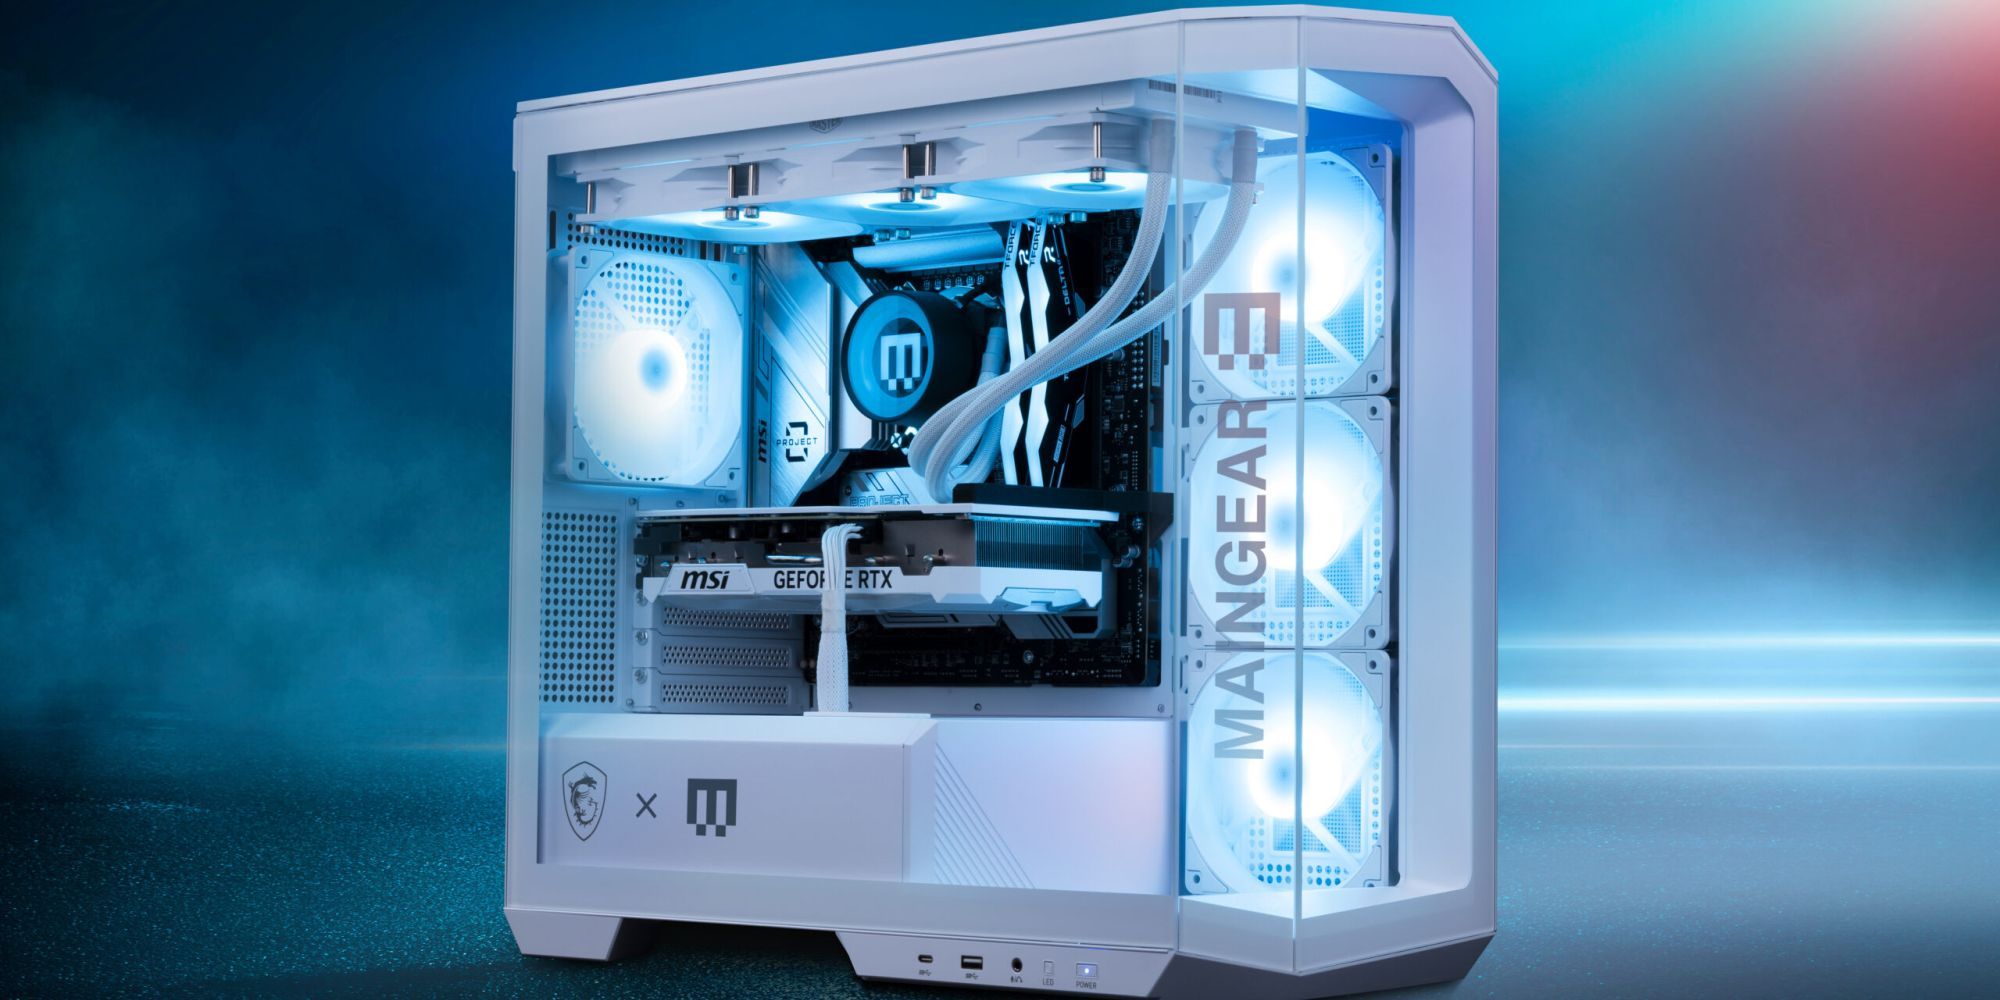 MAINGEAR Announces Drop of New ZERO Limited Edition Gaming PC